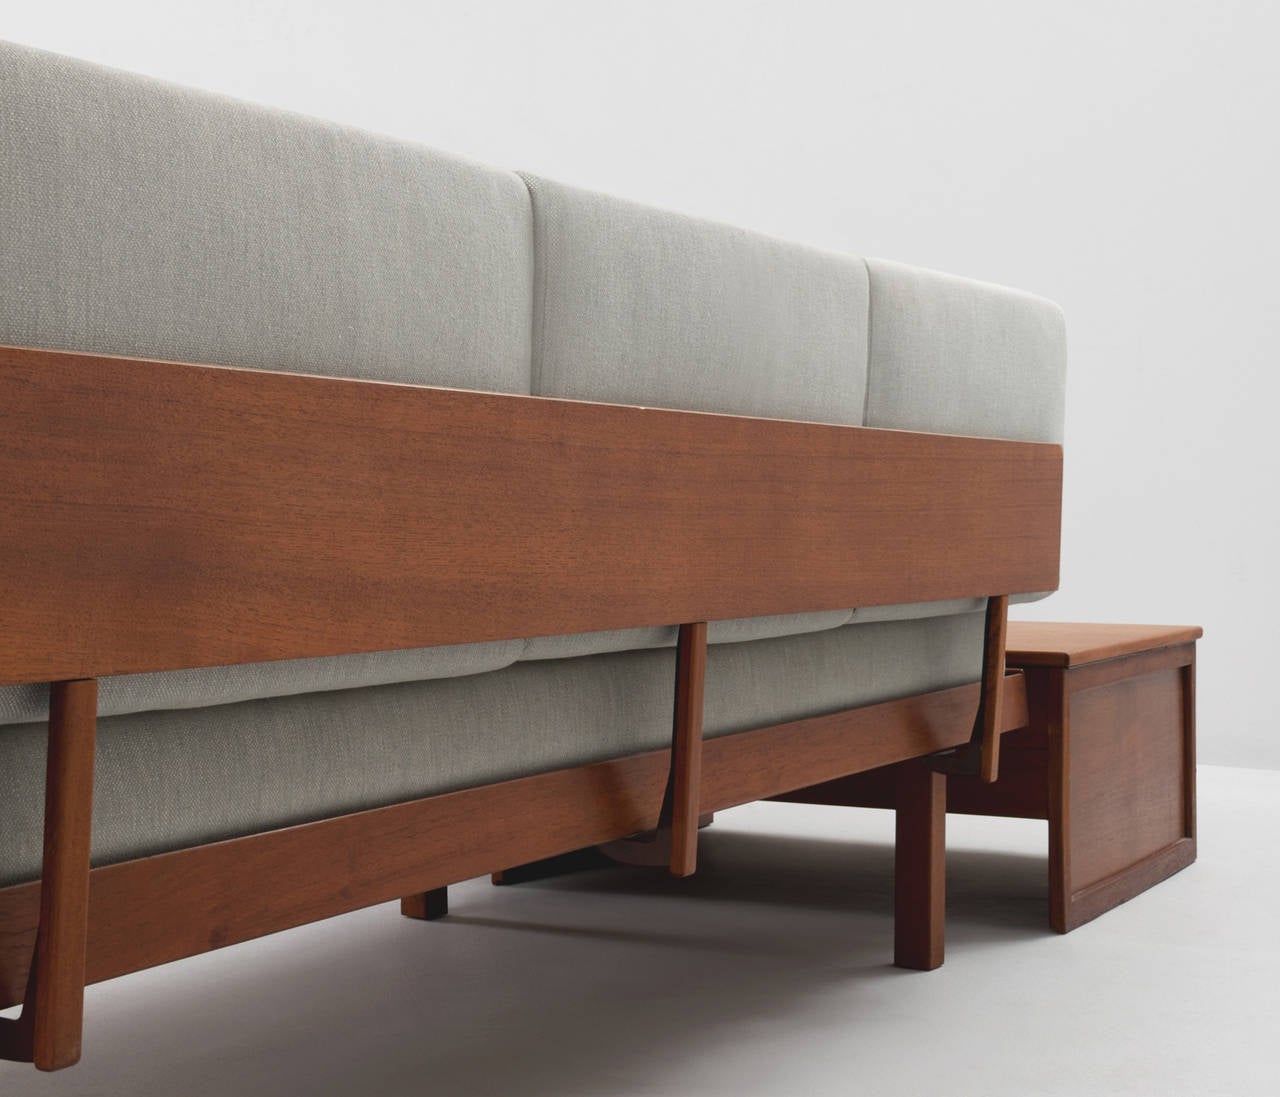 Mid-20th Century Danish Living Room Set in Teak and Fabric Upholstery